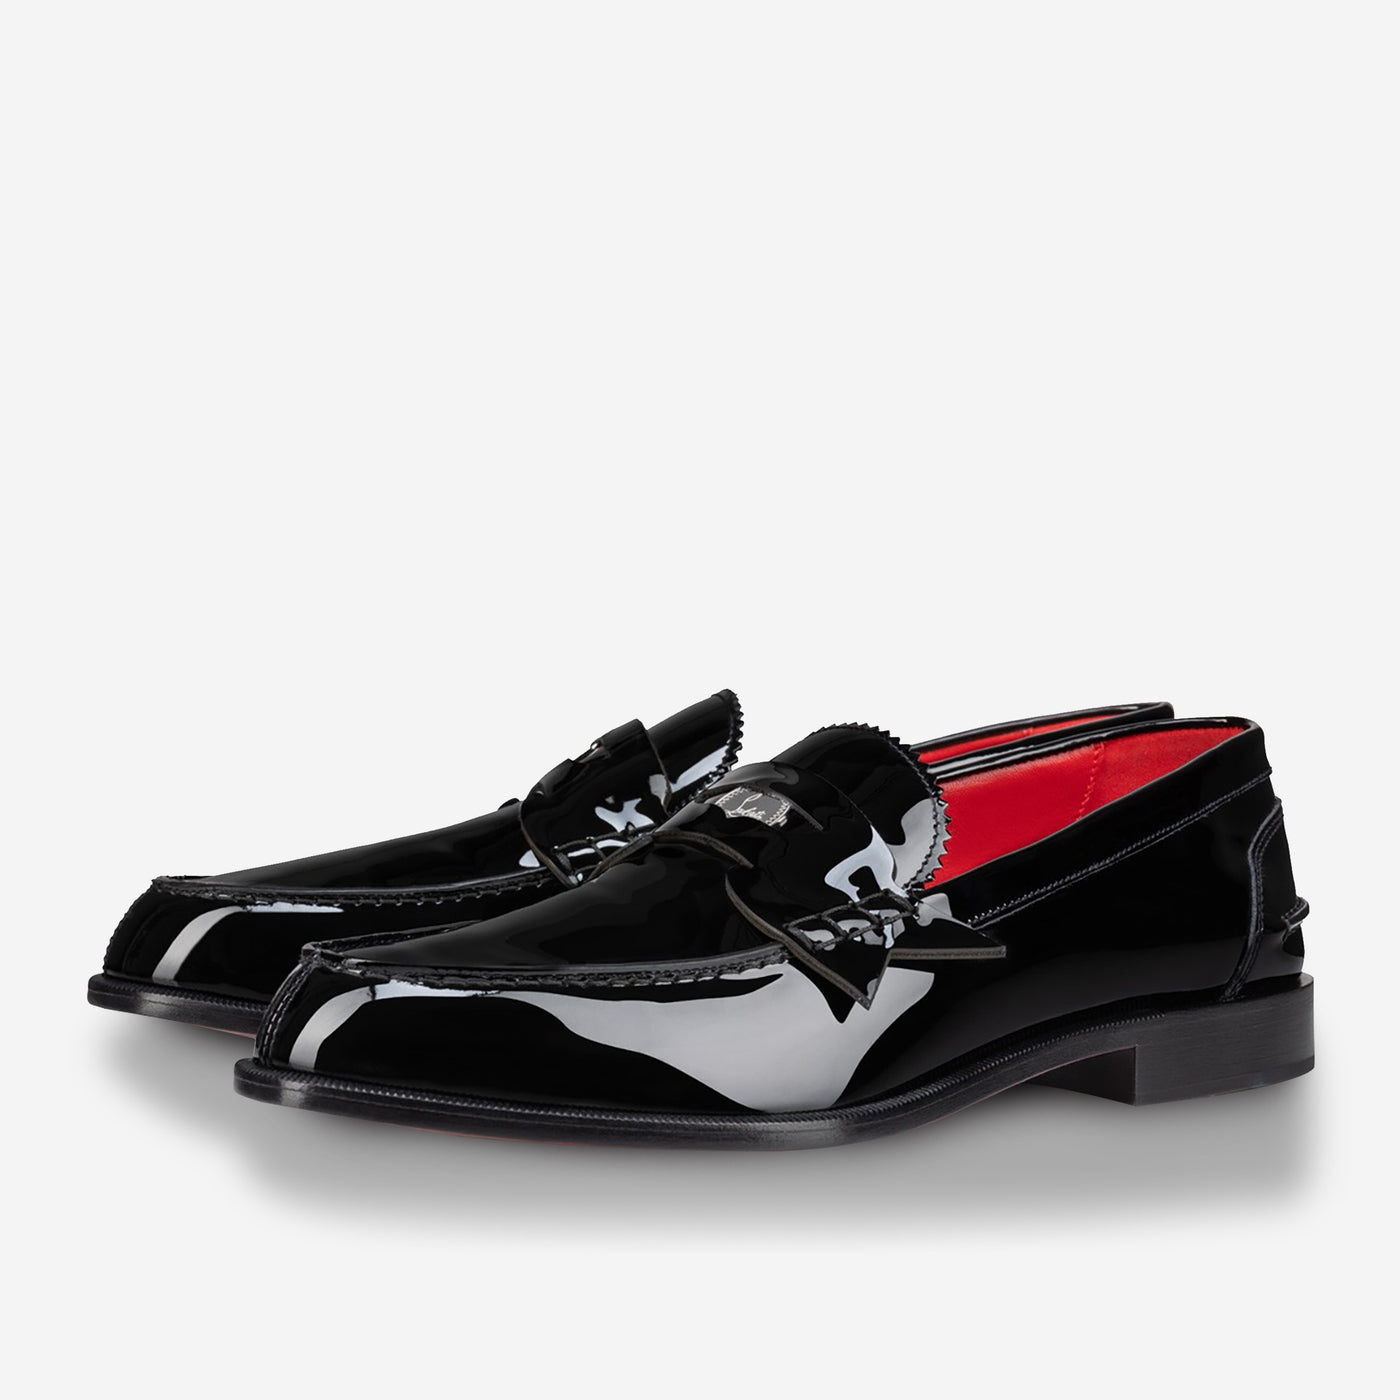 Christian Louboutin Patent Penny Loafer